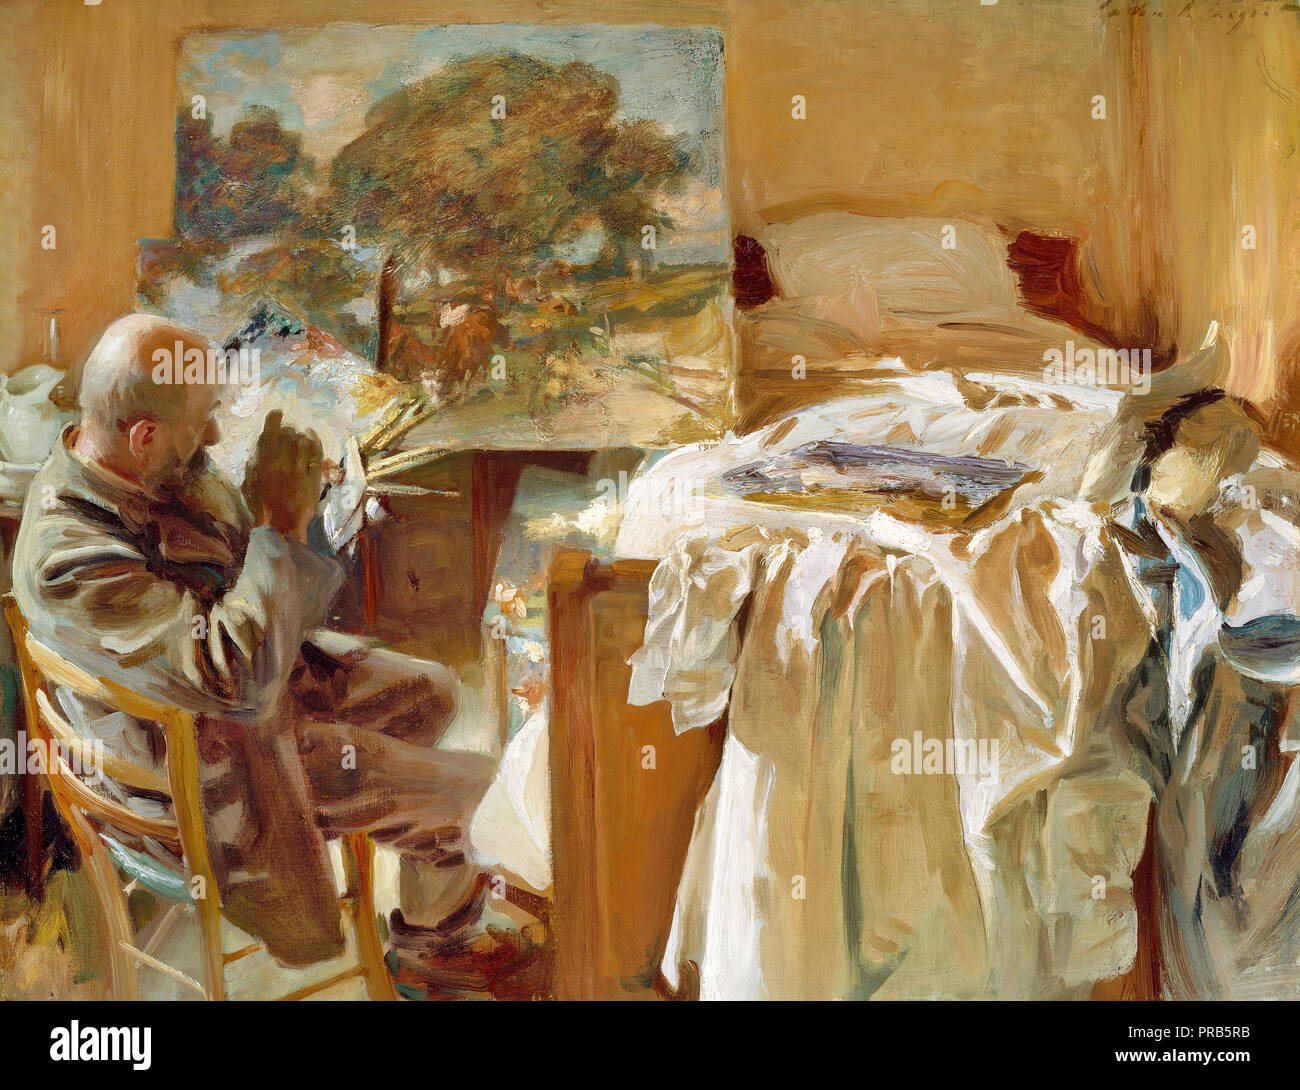 John Singer Sargent, An Artist in His Studio 1904 Oil on canvas, Museum of Fine Arts Boston, USA. Stock Photo